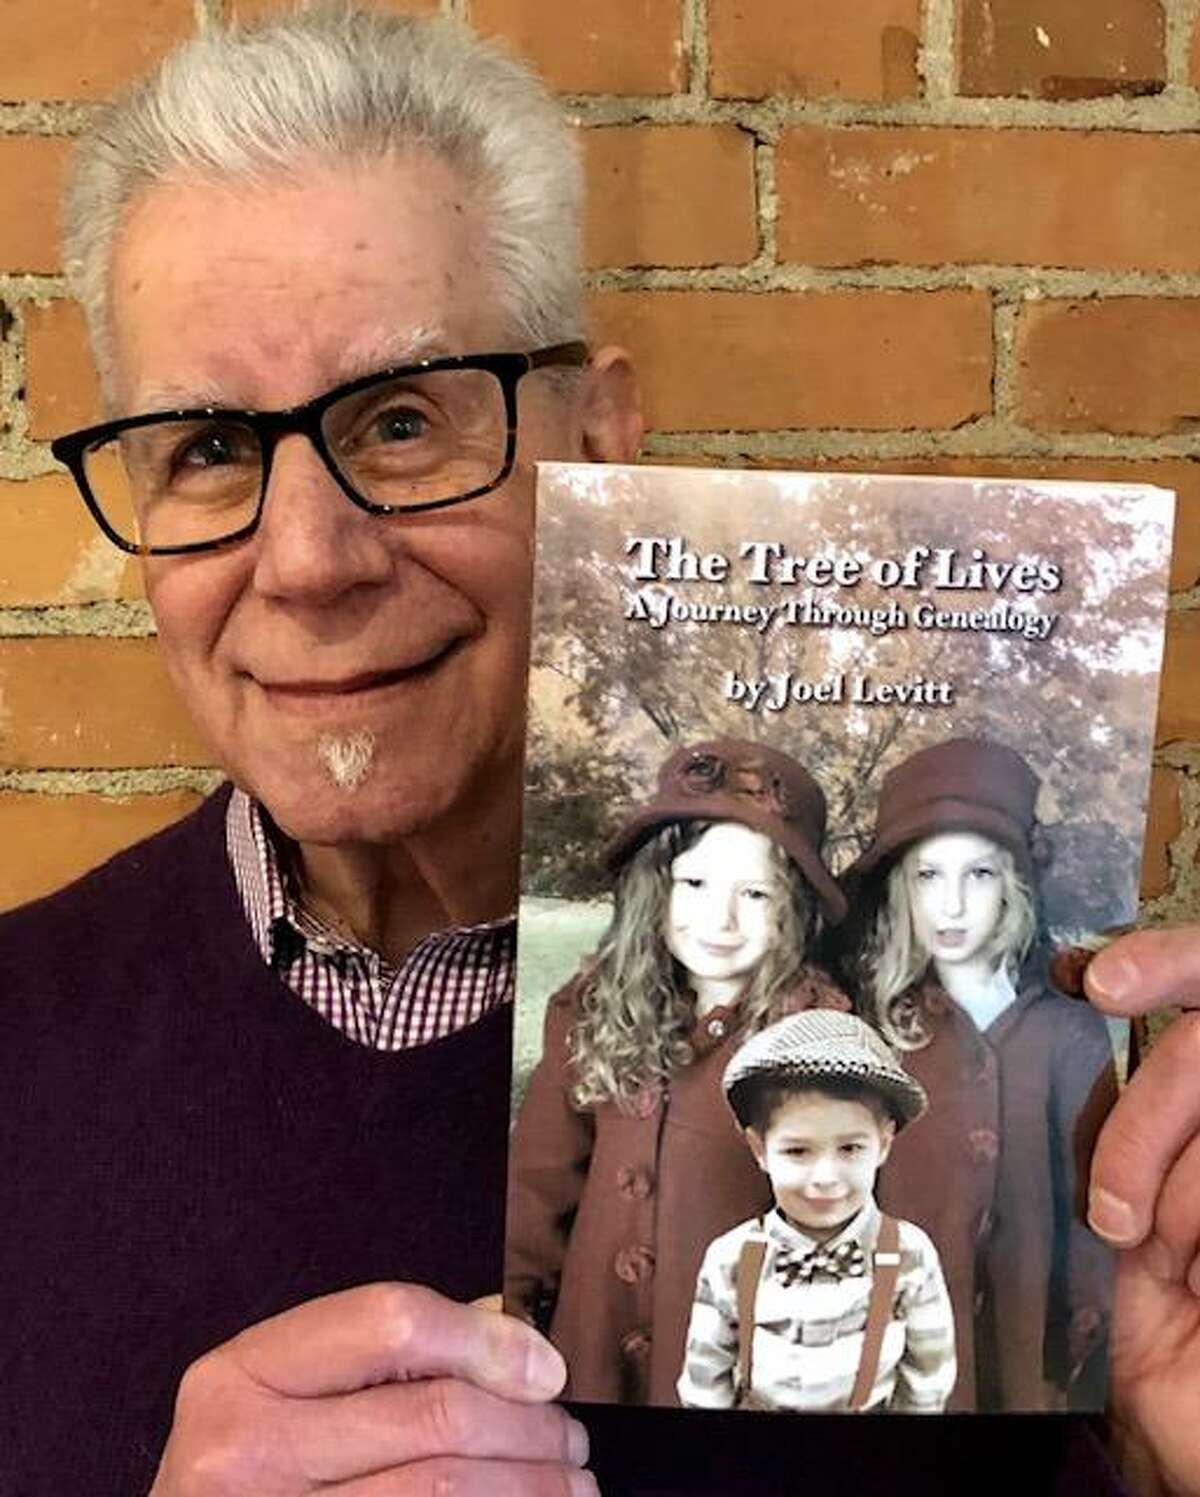 Joel Levitt poses with his new book, “The Tree of Lives.”